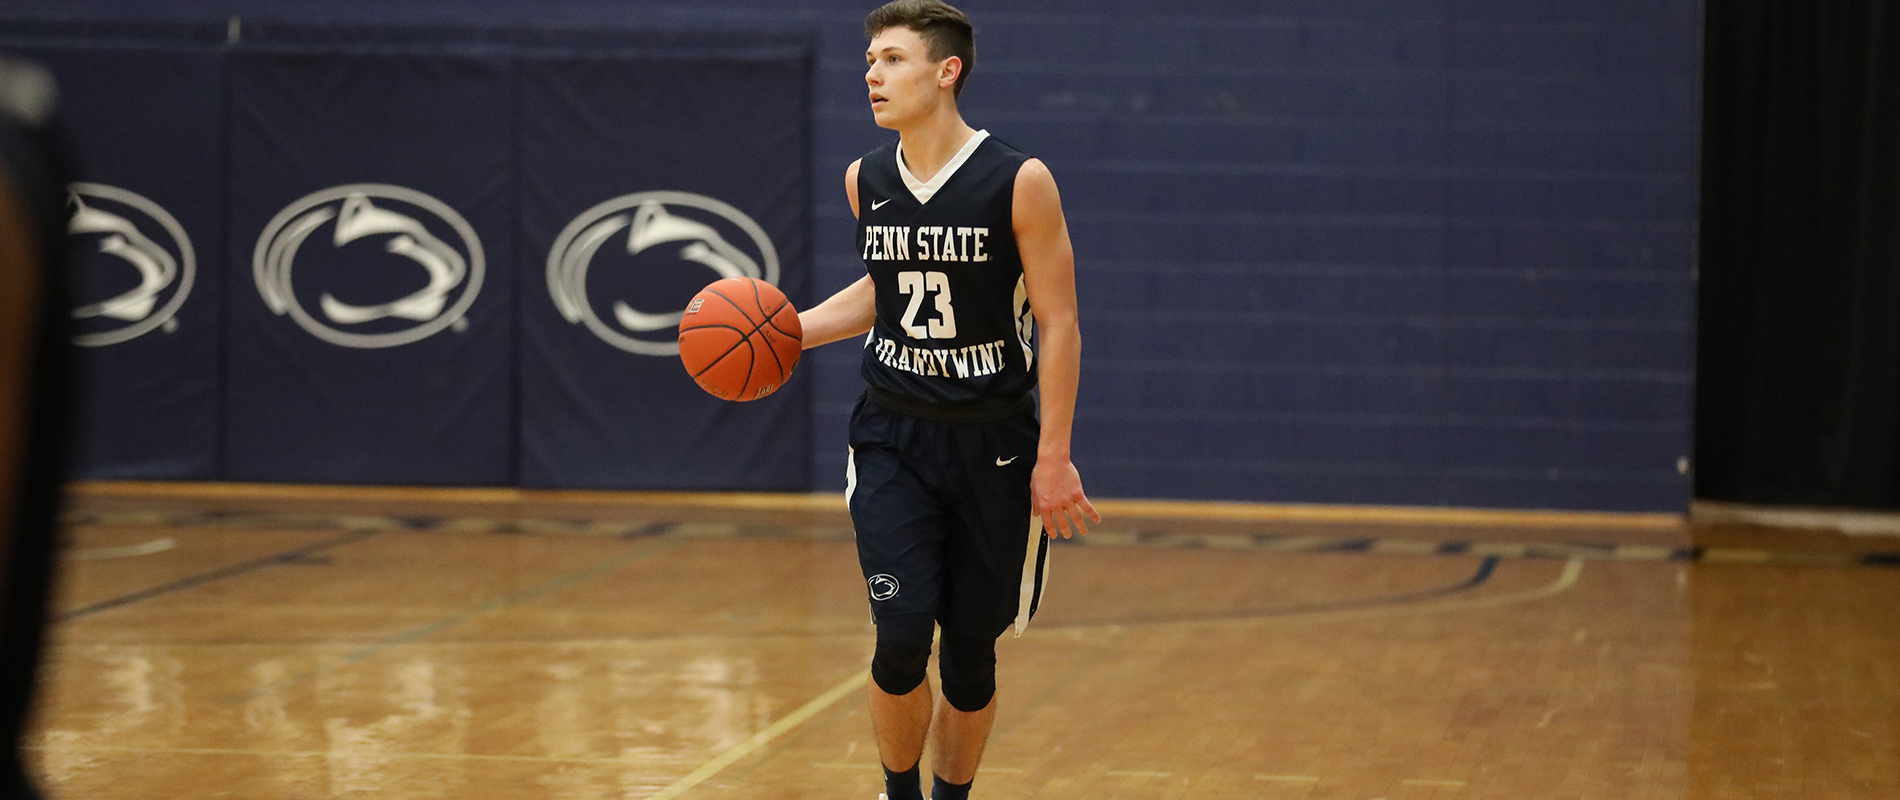 Pat Gallagher: Men's Basketball Player of the Week